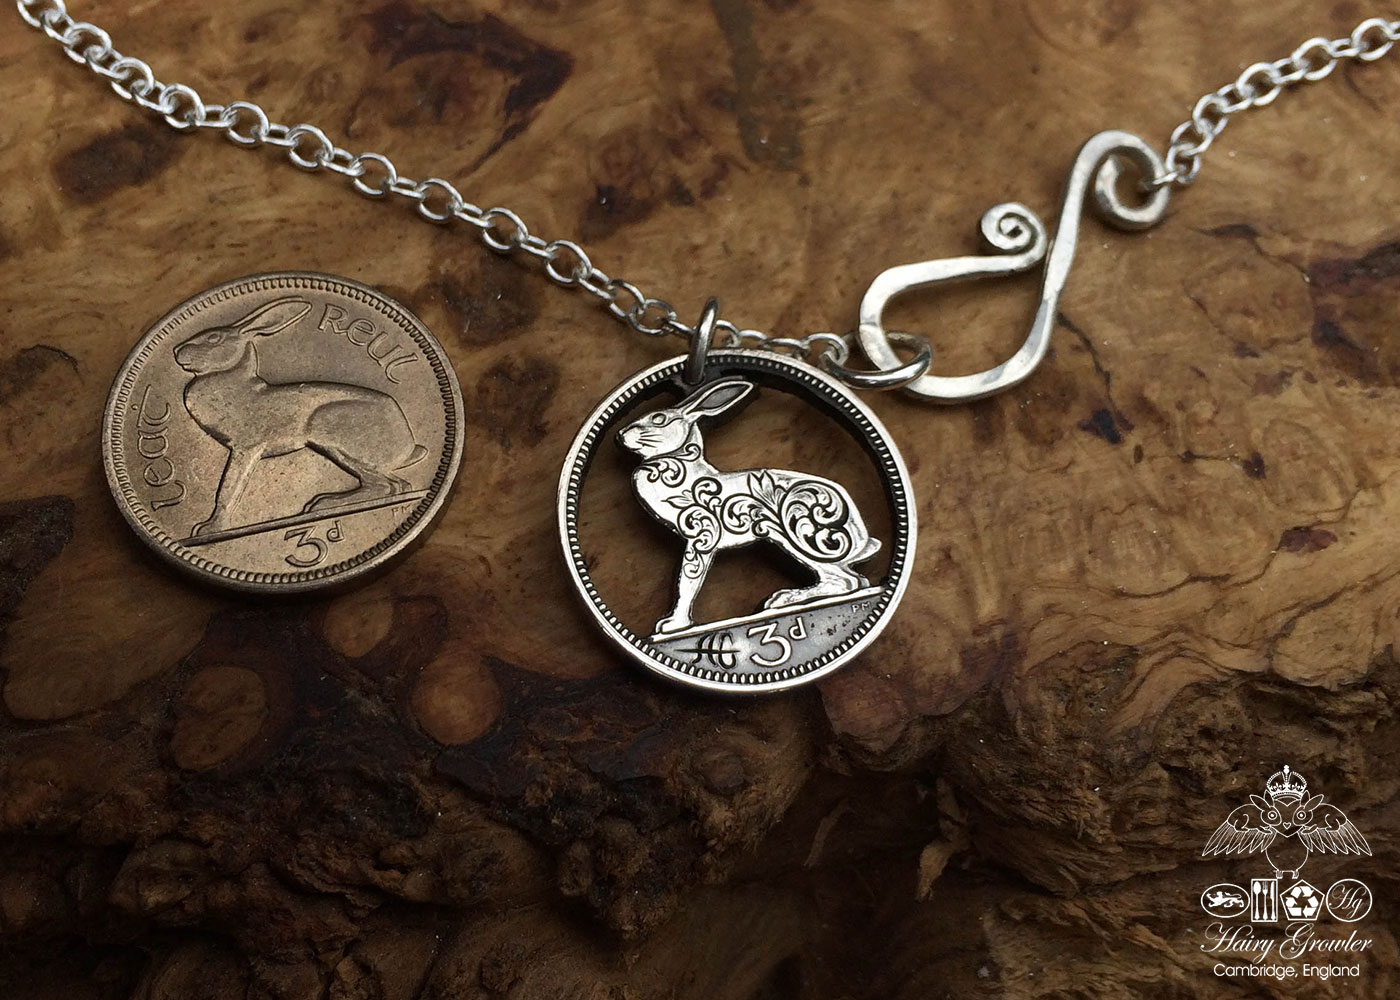 Hand-cut and carved Irish hare threepence coin pendant